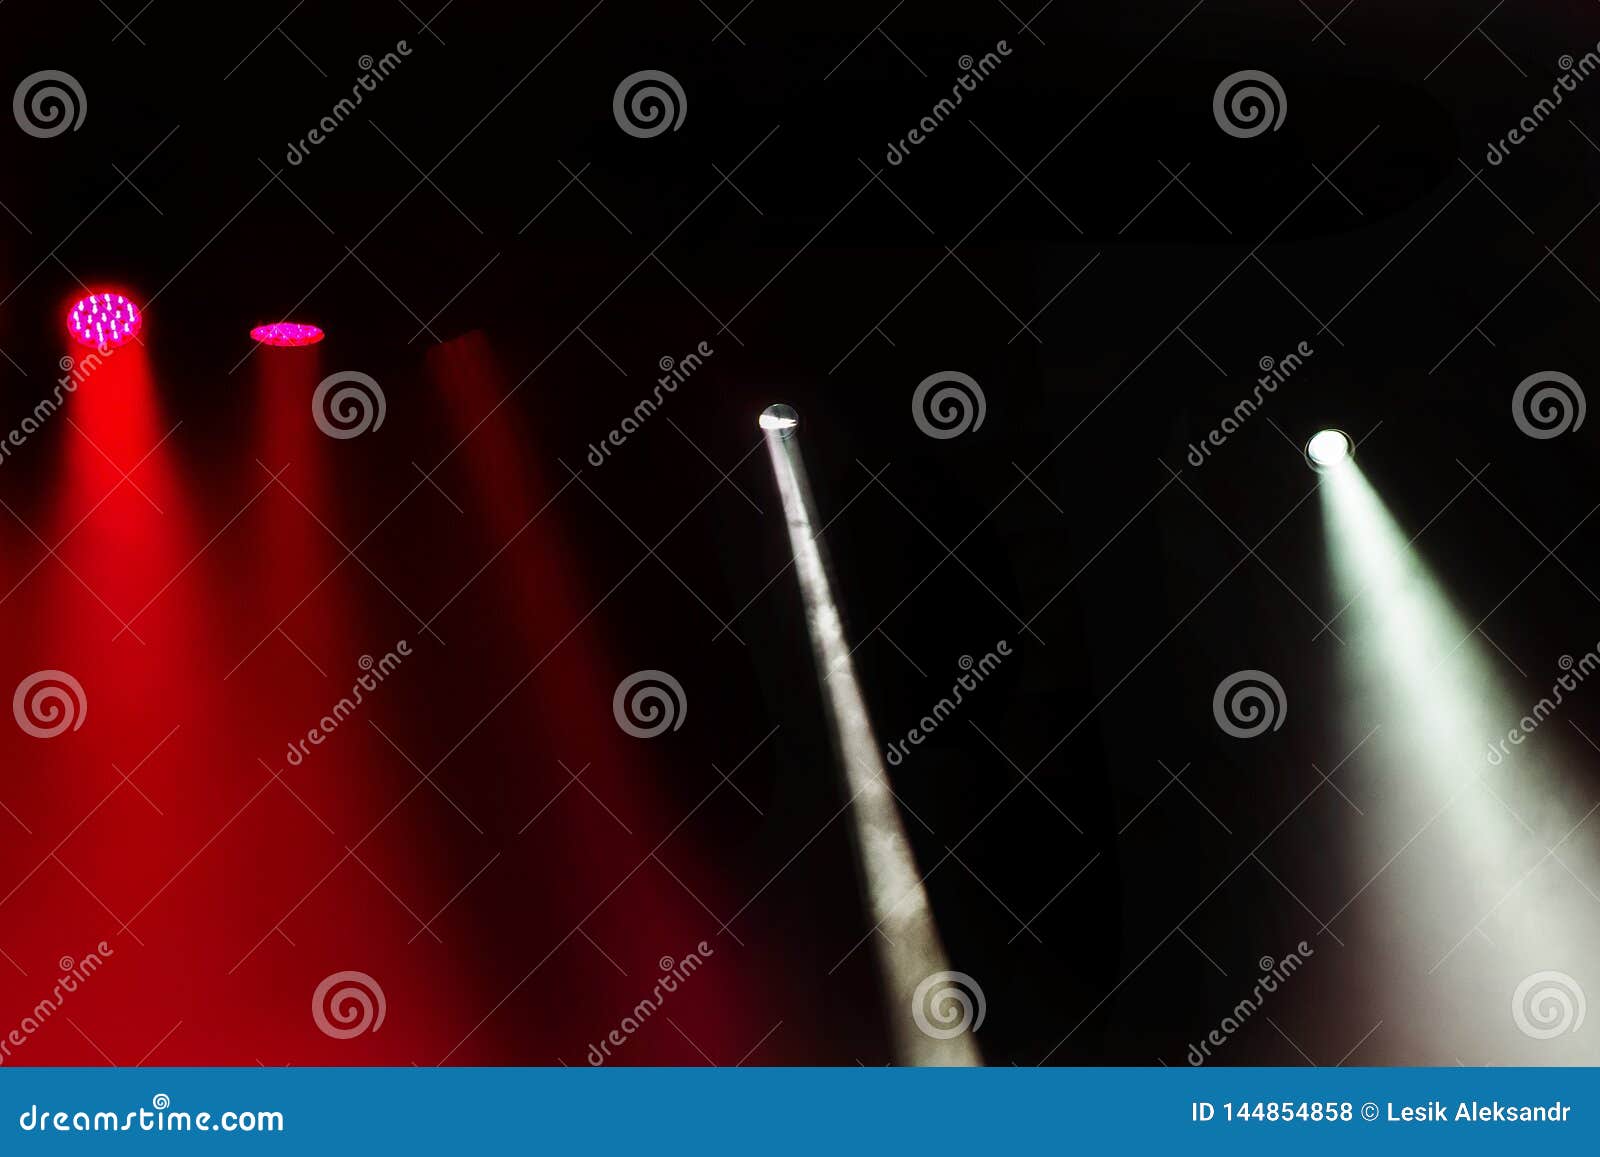 stage lights. several projectors in the dark. multi-colored light beams from the stage spotlights on the stage in the smoke at the